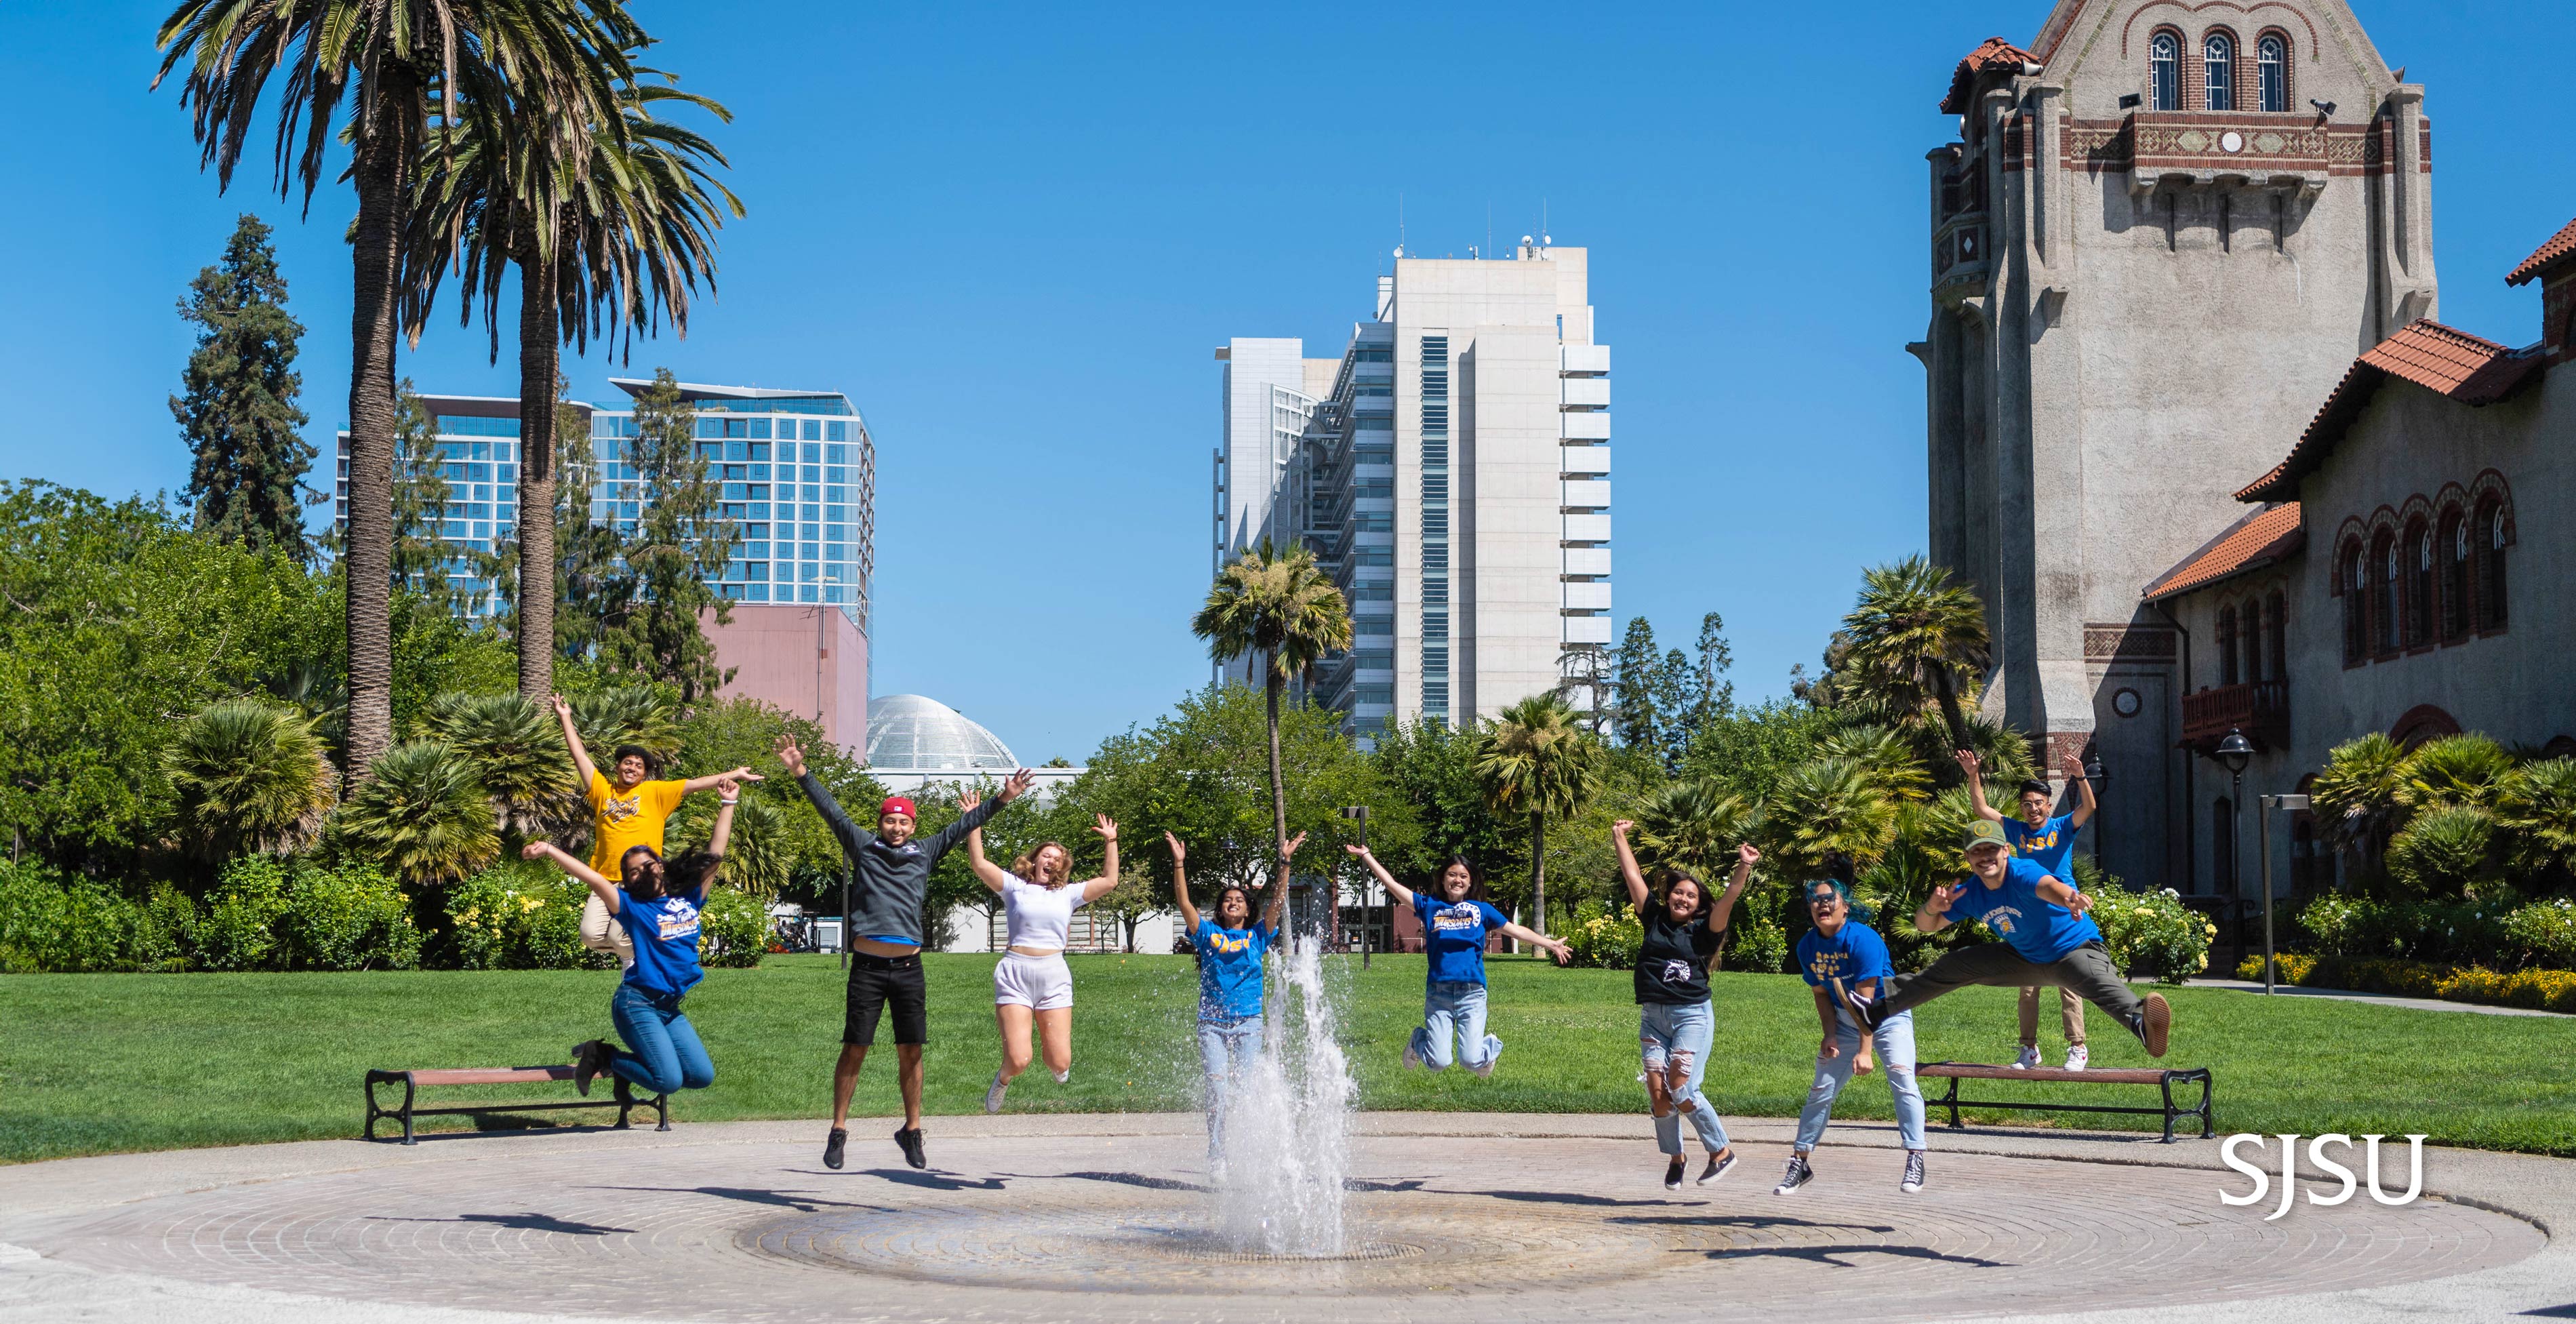 SJSU students jumping up in mid air in different poses in front of the fountain next to Tower Hall on campus.